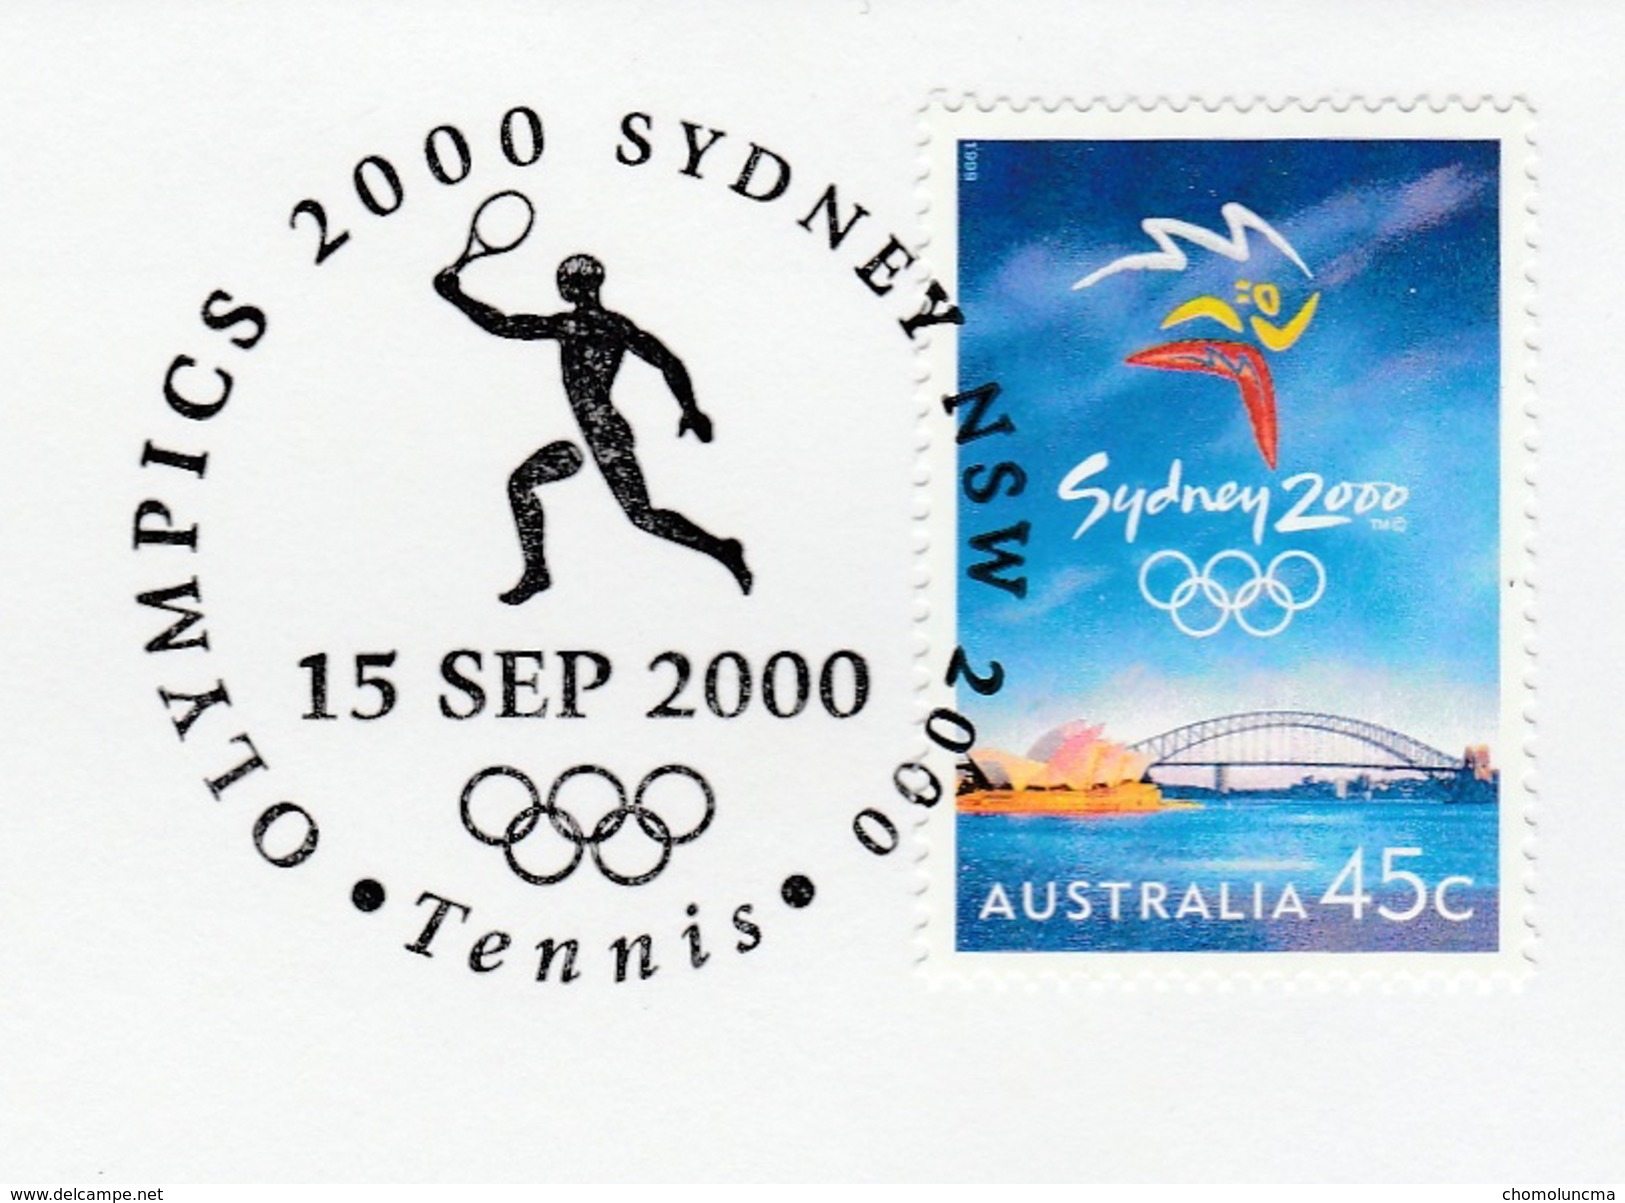 Sydney 2000 Official Cover Jeux Olympiques Olympics Games Olympische Tennis With Similar Stamps And Handstamp Olympics - Sommer 2000: Sydney